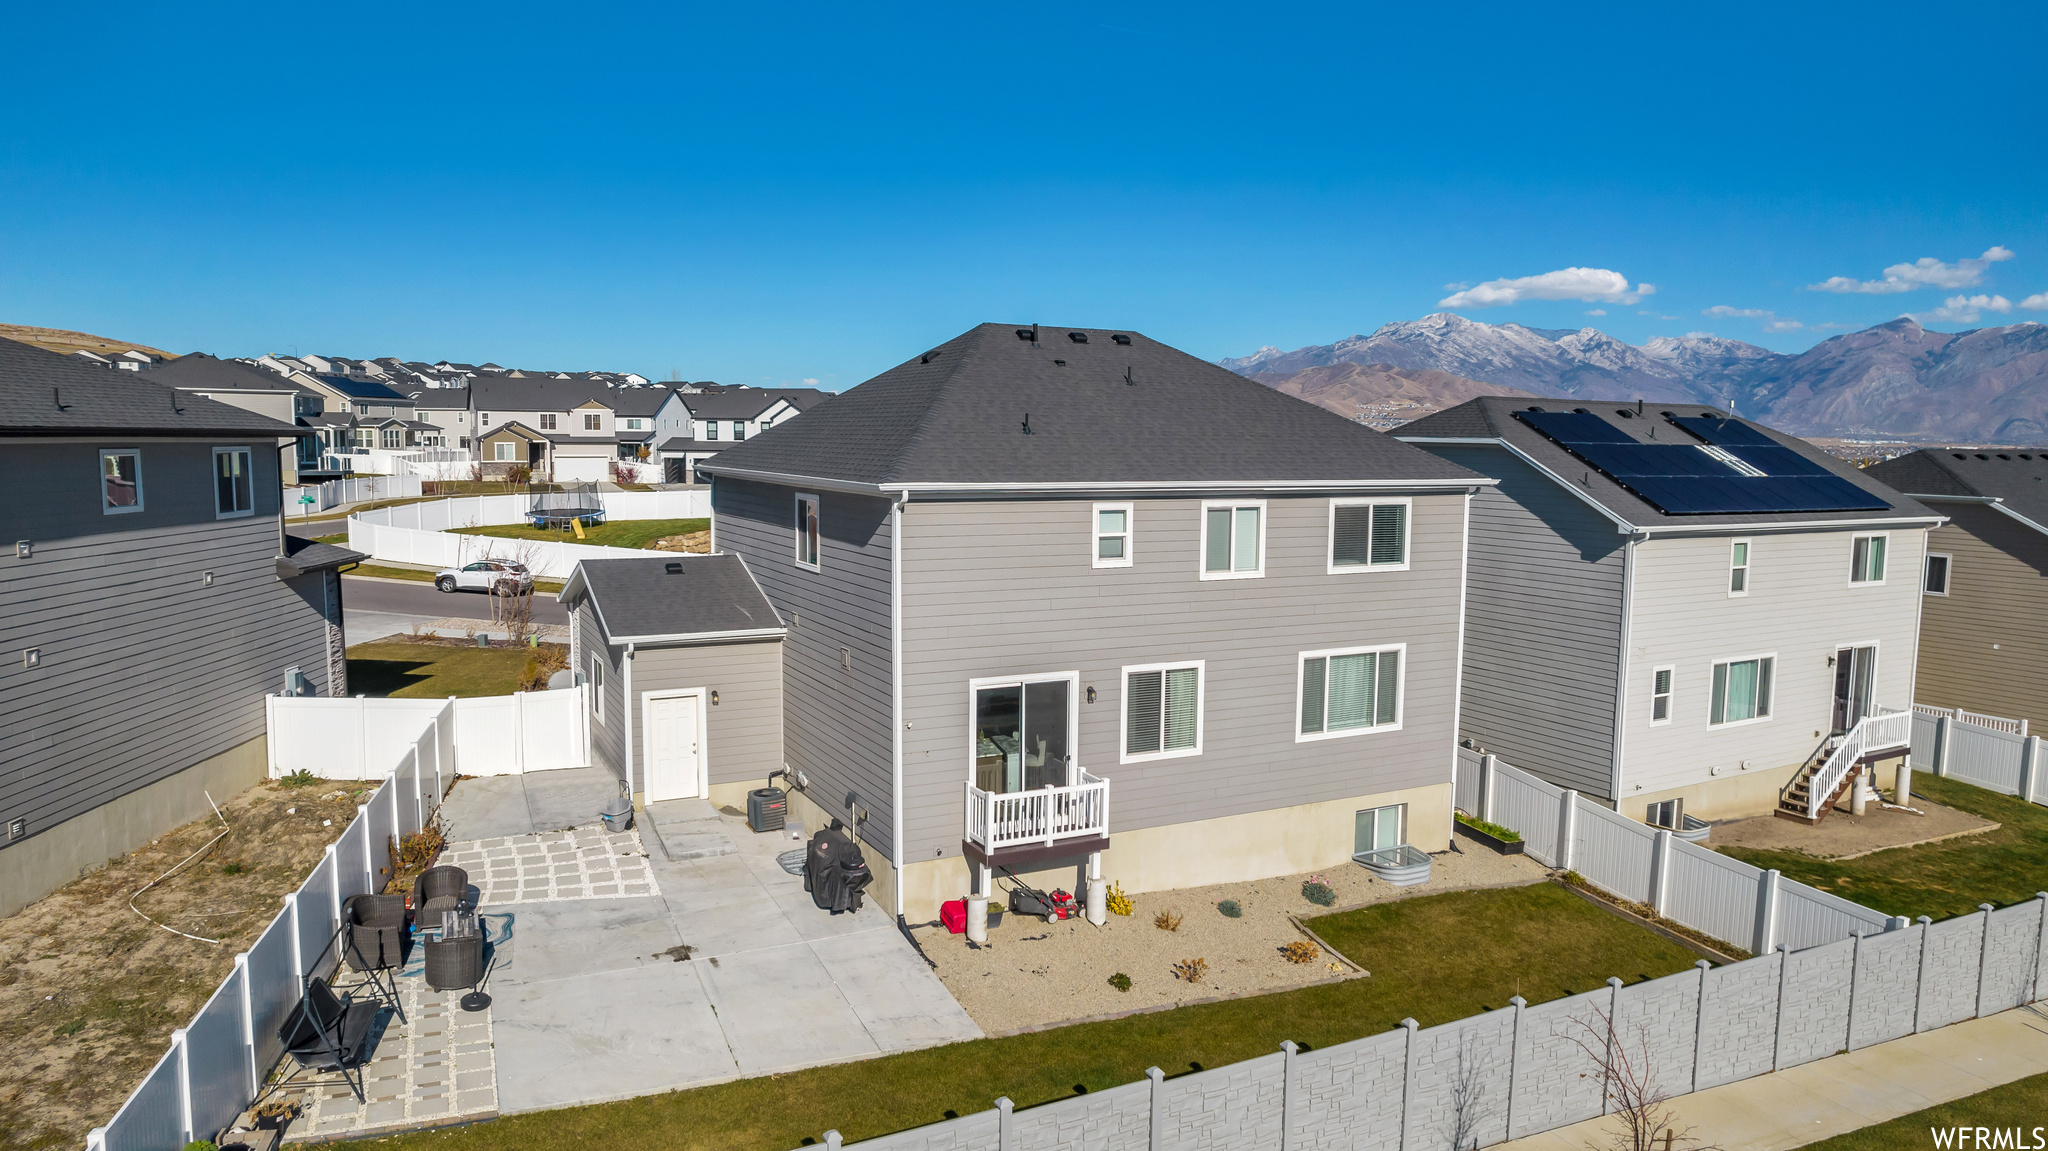 View of front of house with solar panels, a patio, and a mountain view